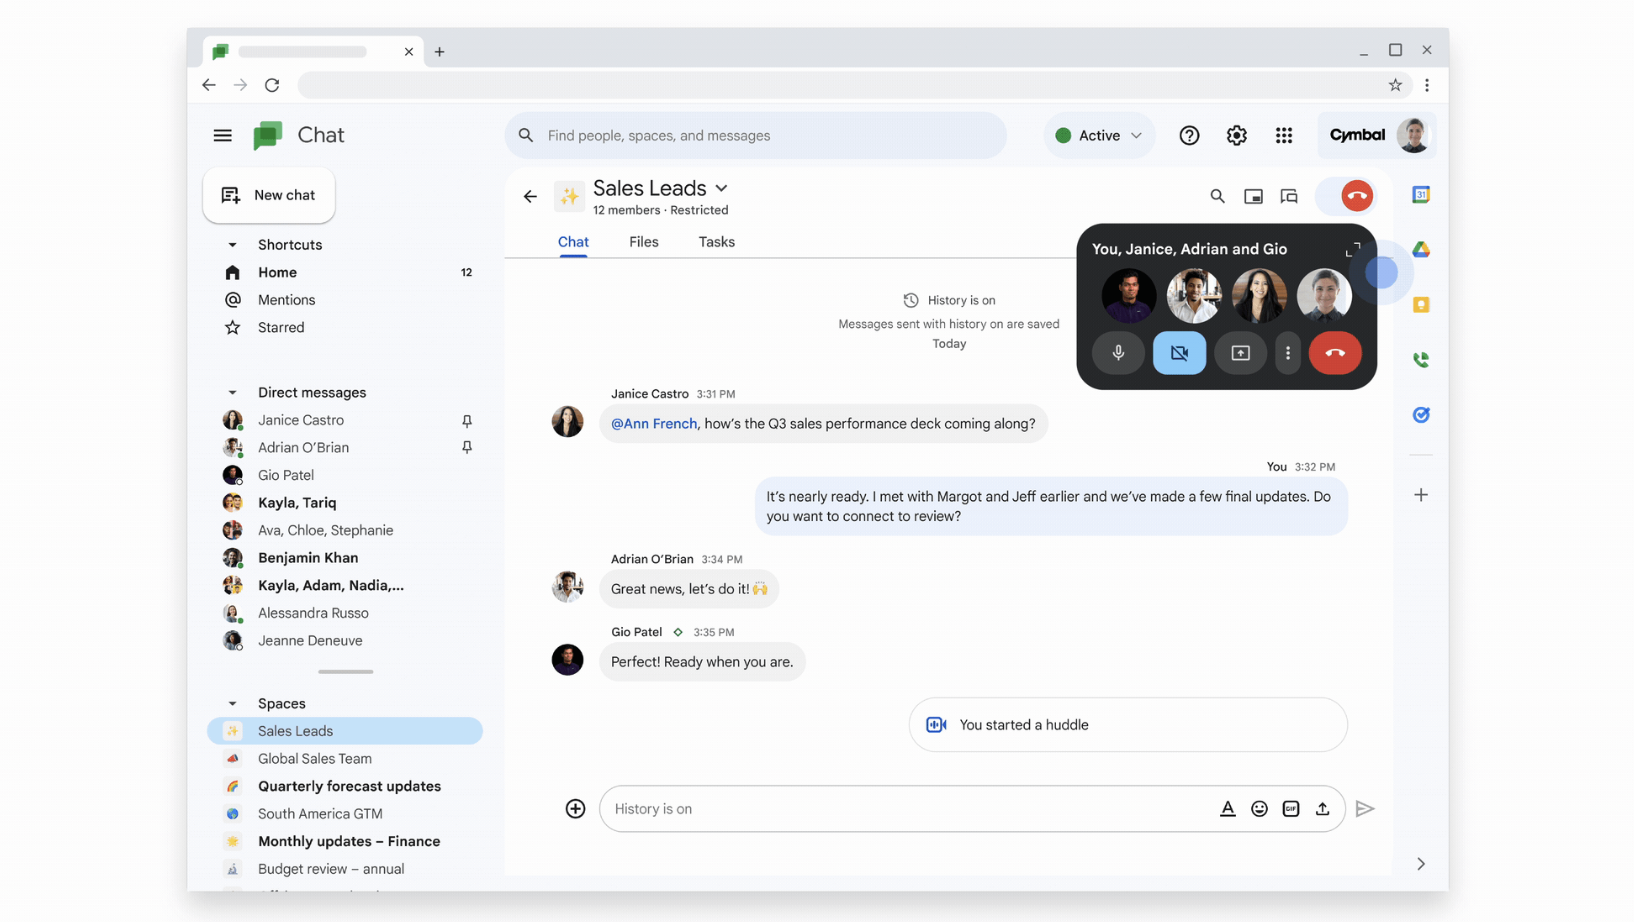 google chat duet ai 64ee47fe4d211 sej - Google Workspace Users Can Request No-Cost Trial Of Duet AI